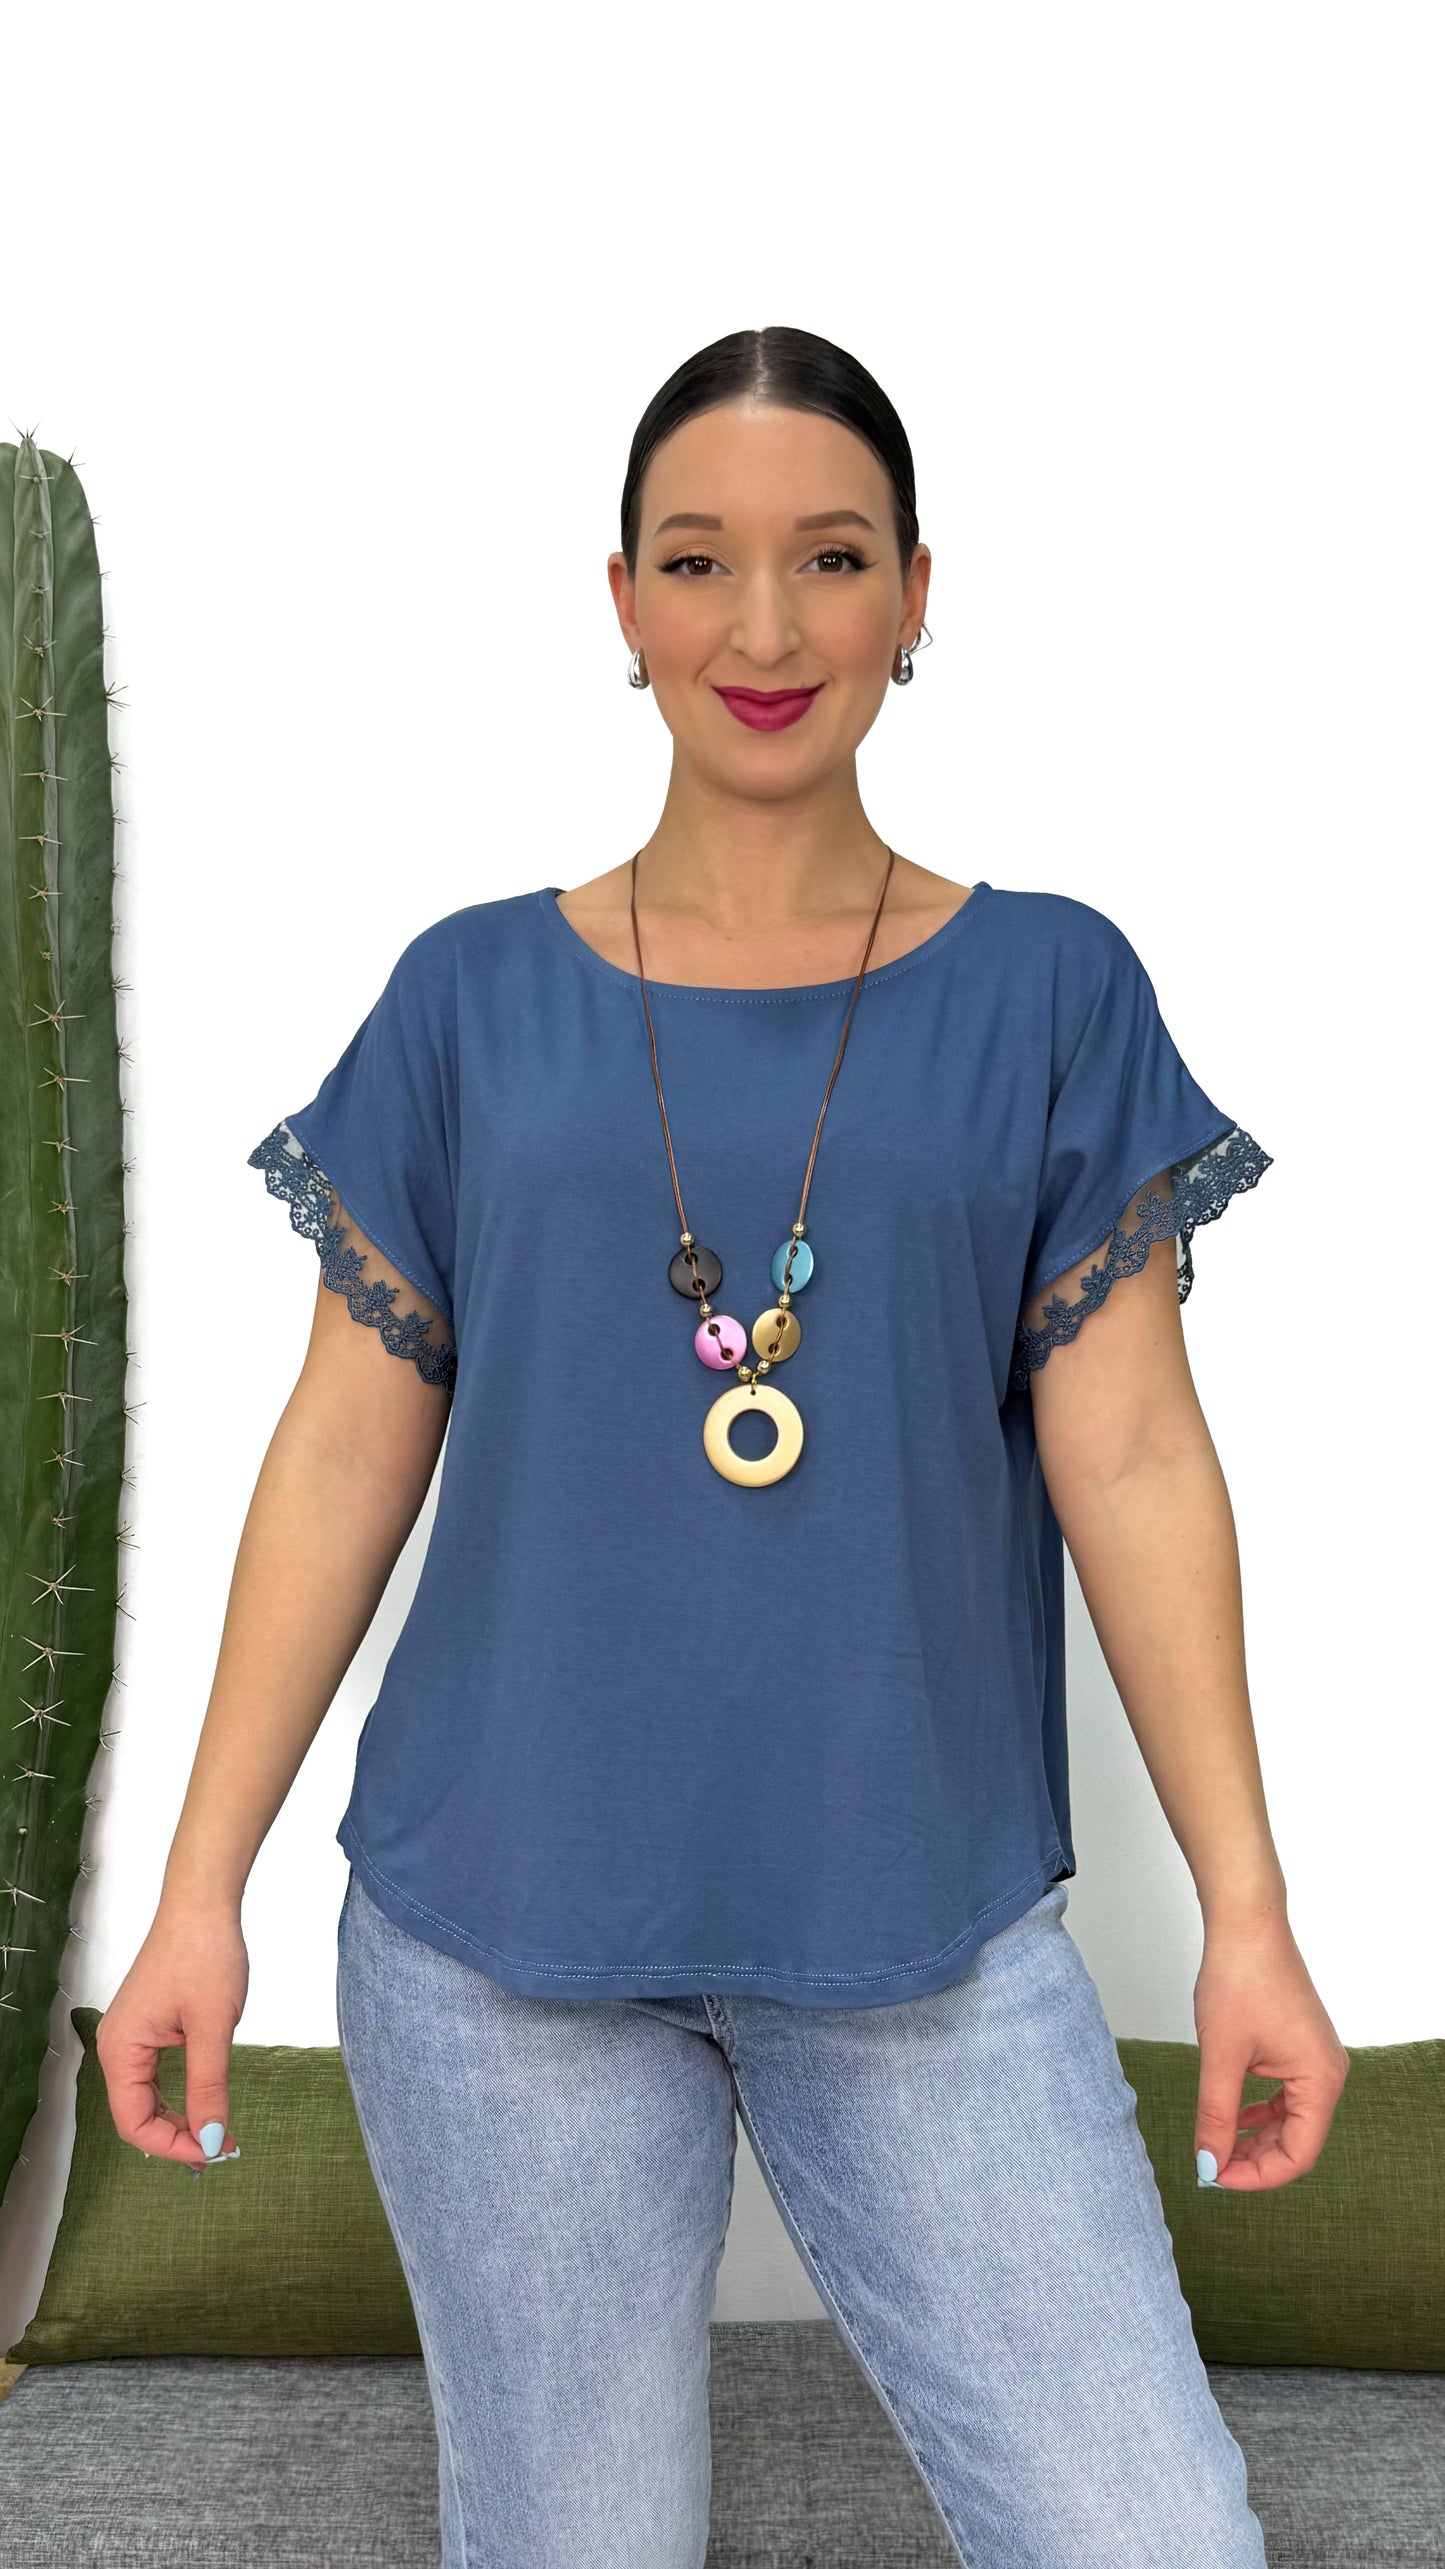 T-SHIRT CON MANICA IN PIZZO